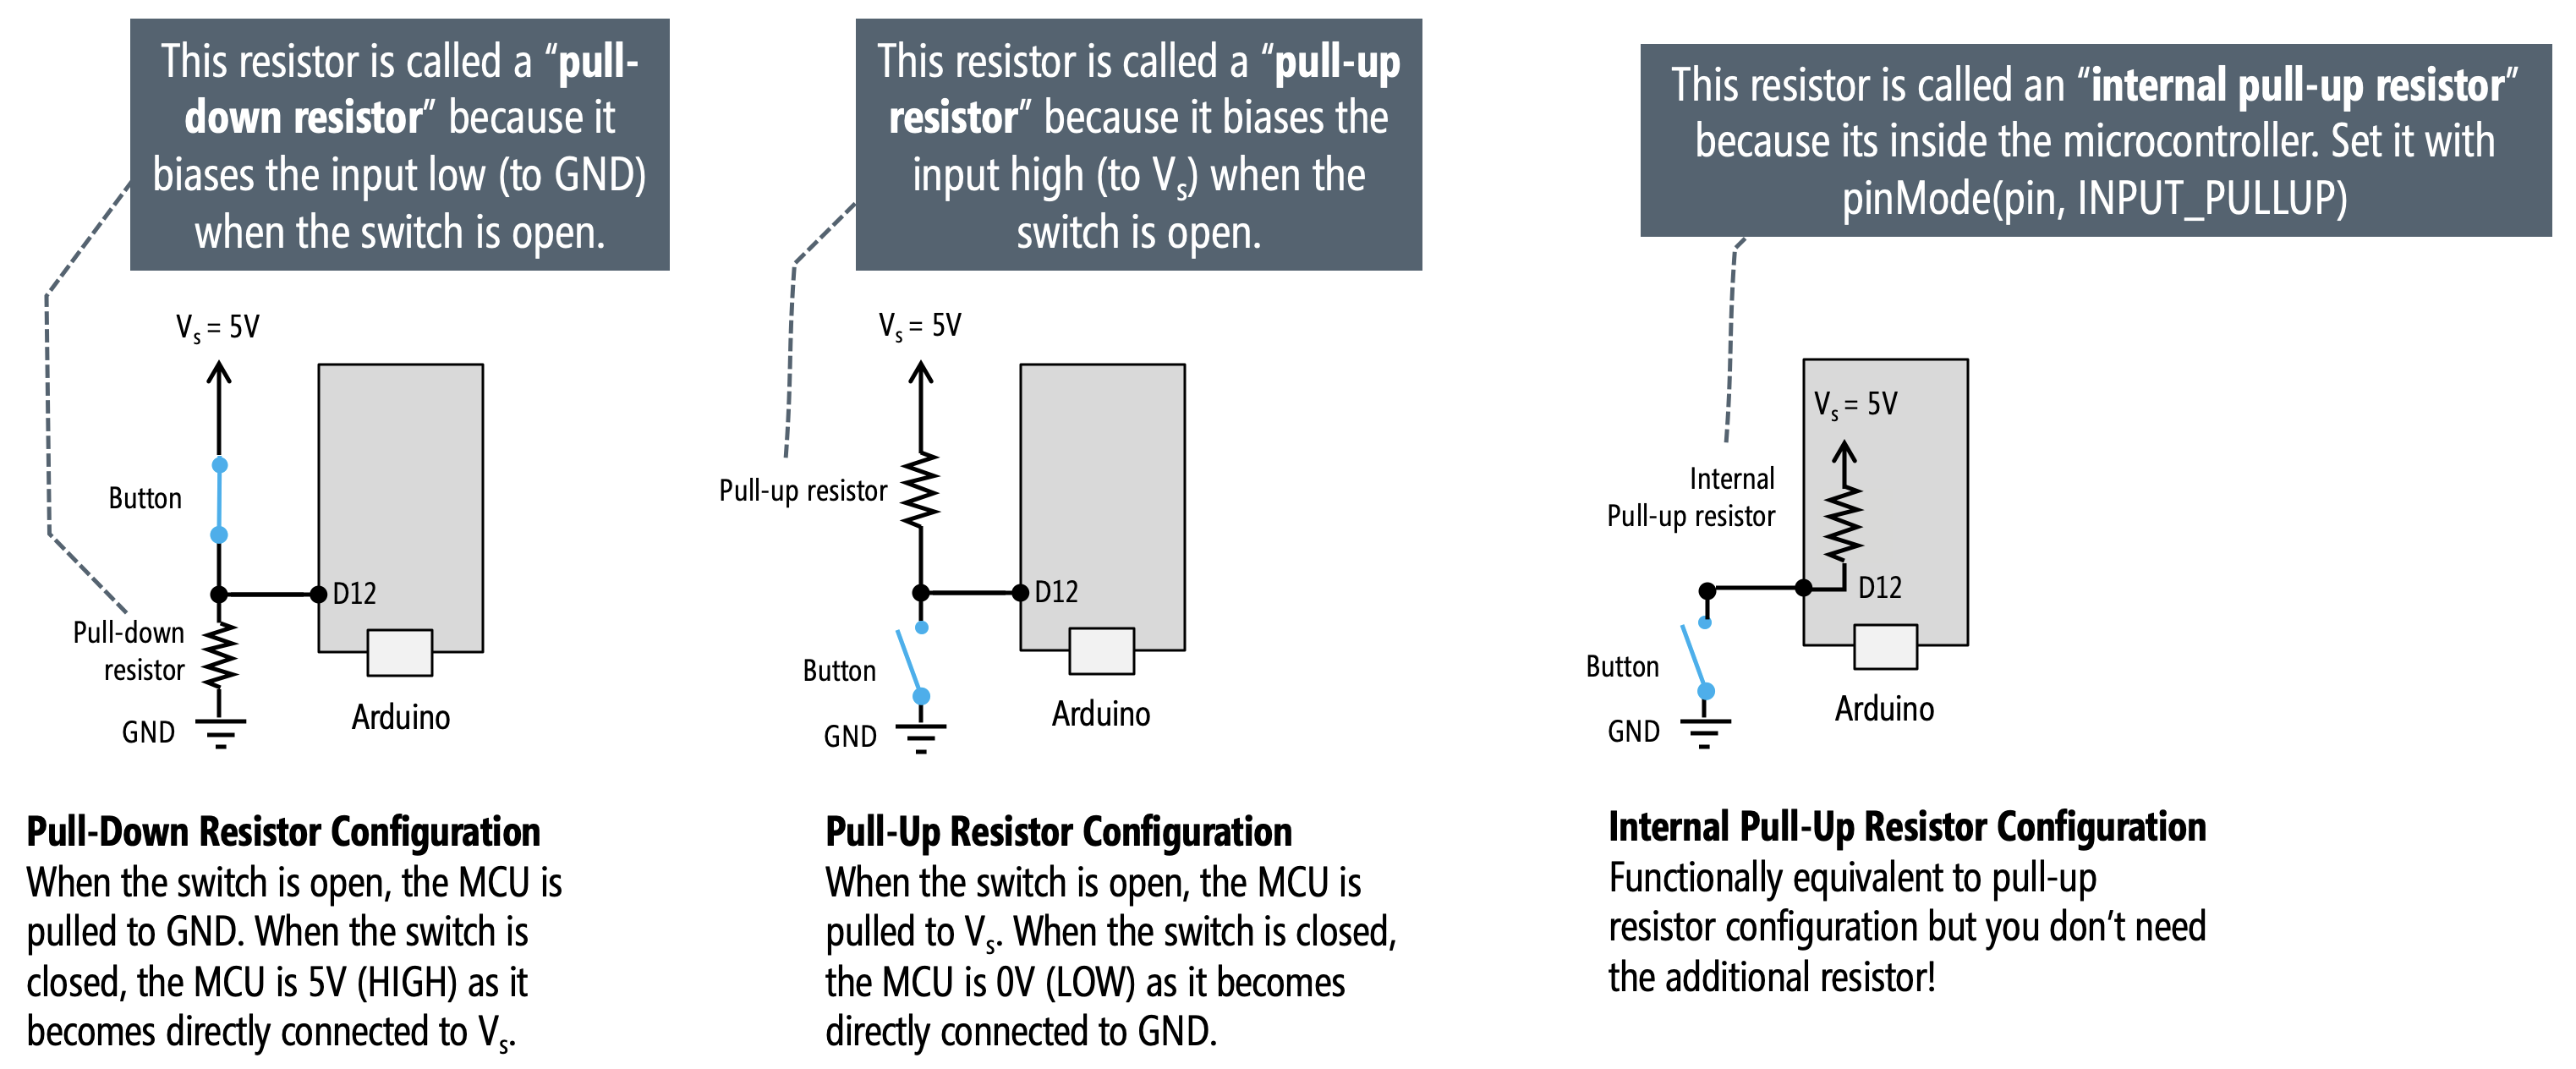 Difference between a pull-down, pull-up, and internal pull-up resistor